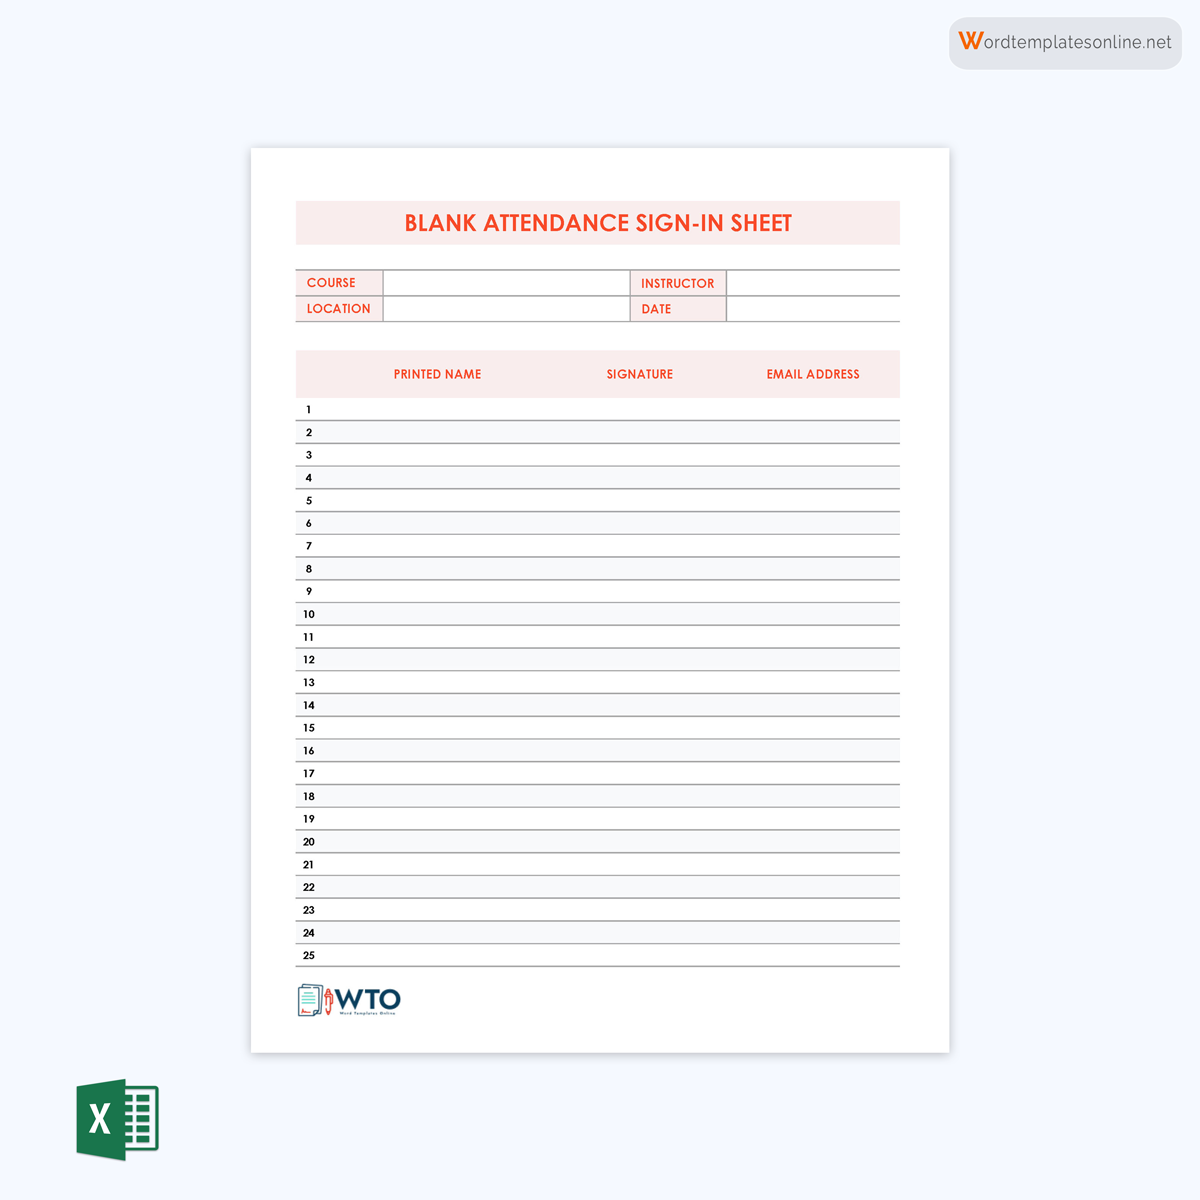 Free Seminar Sign-in Sheet template in ms word